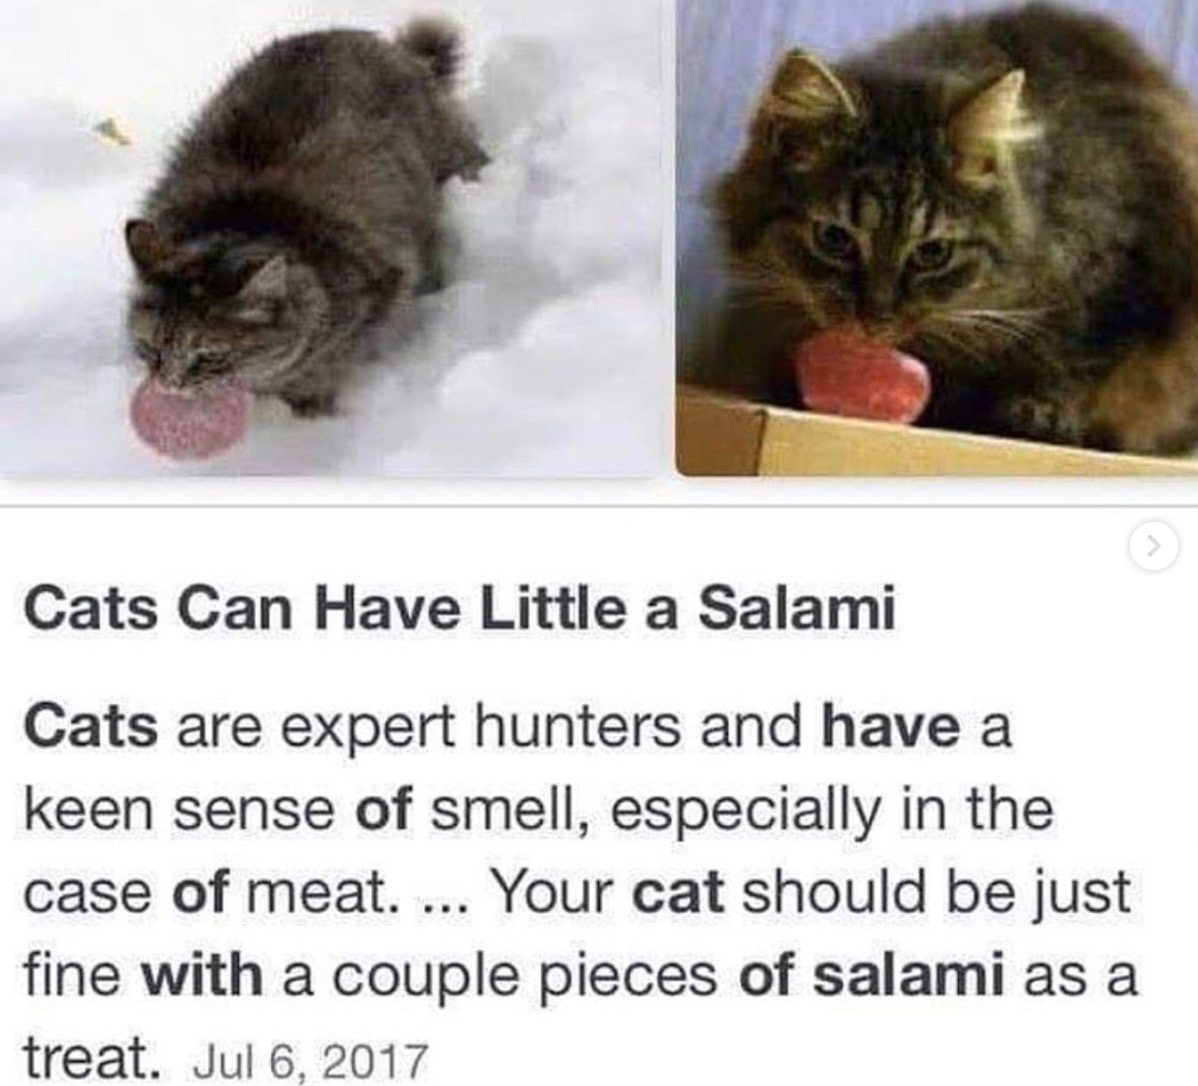 meme - Cats Can Have Little a Salami Cats are expert hunters and have a keen sense of smell, especially in the case of meat. ... Your cat should be just fine with a couple pieces of salami as a treat.